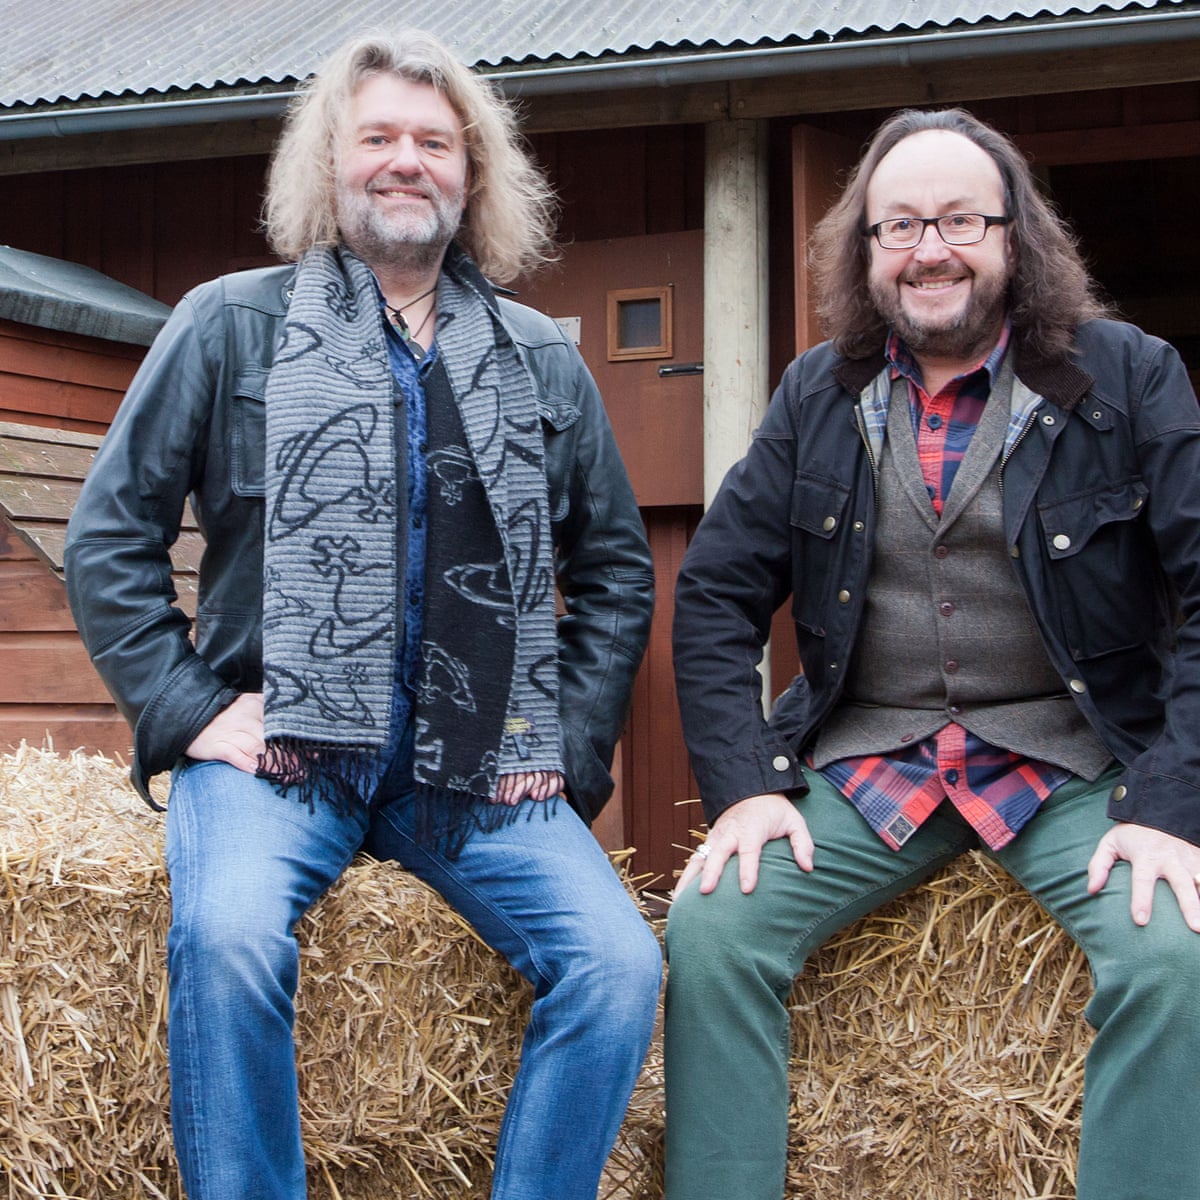 Si King From Hairy Bikers Splits With Australian fiancé he was set to marry this year!